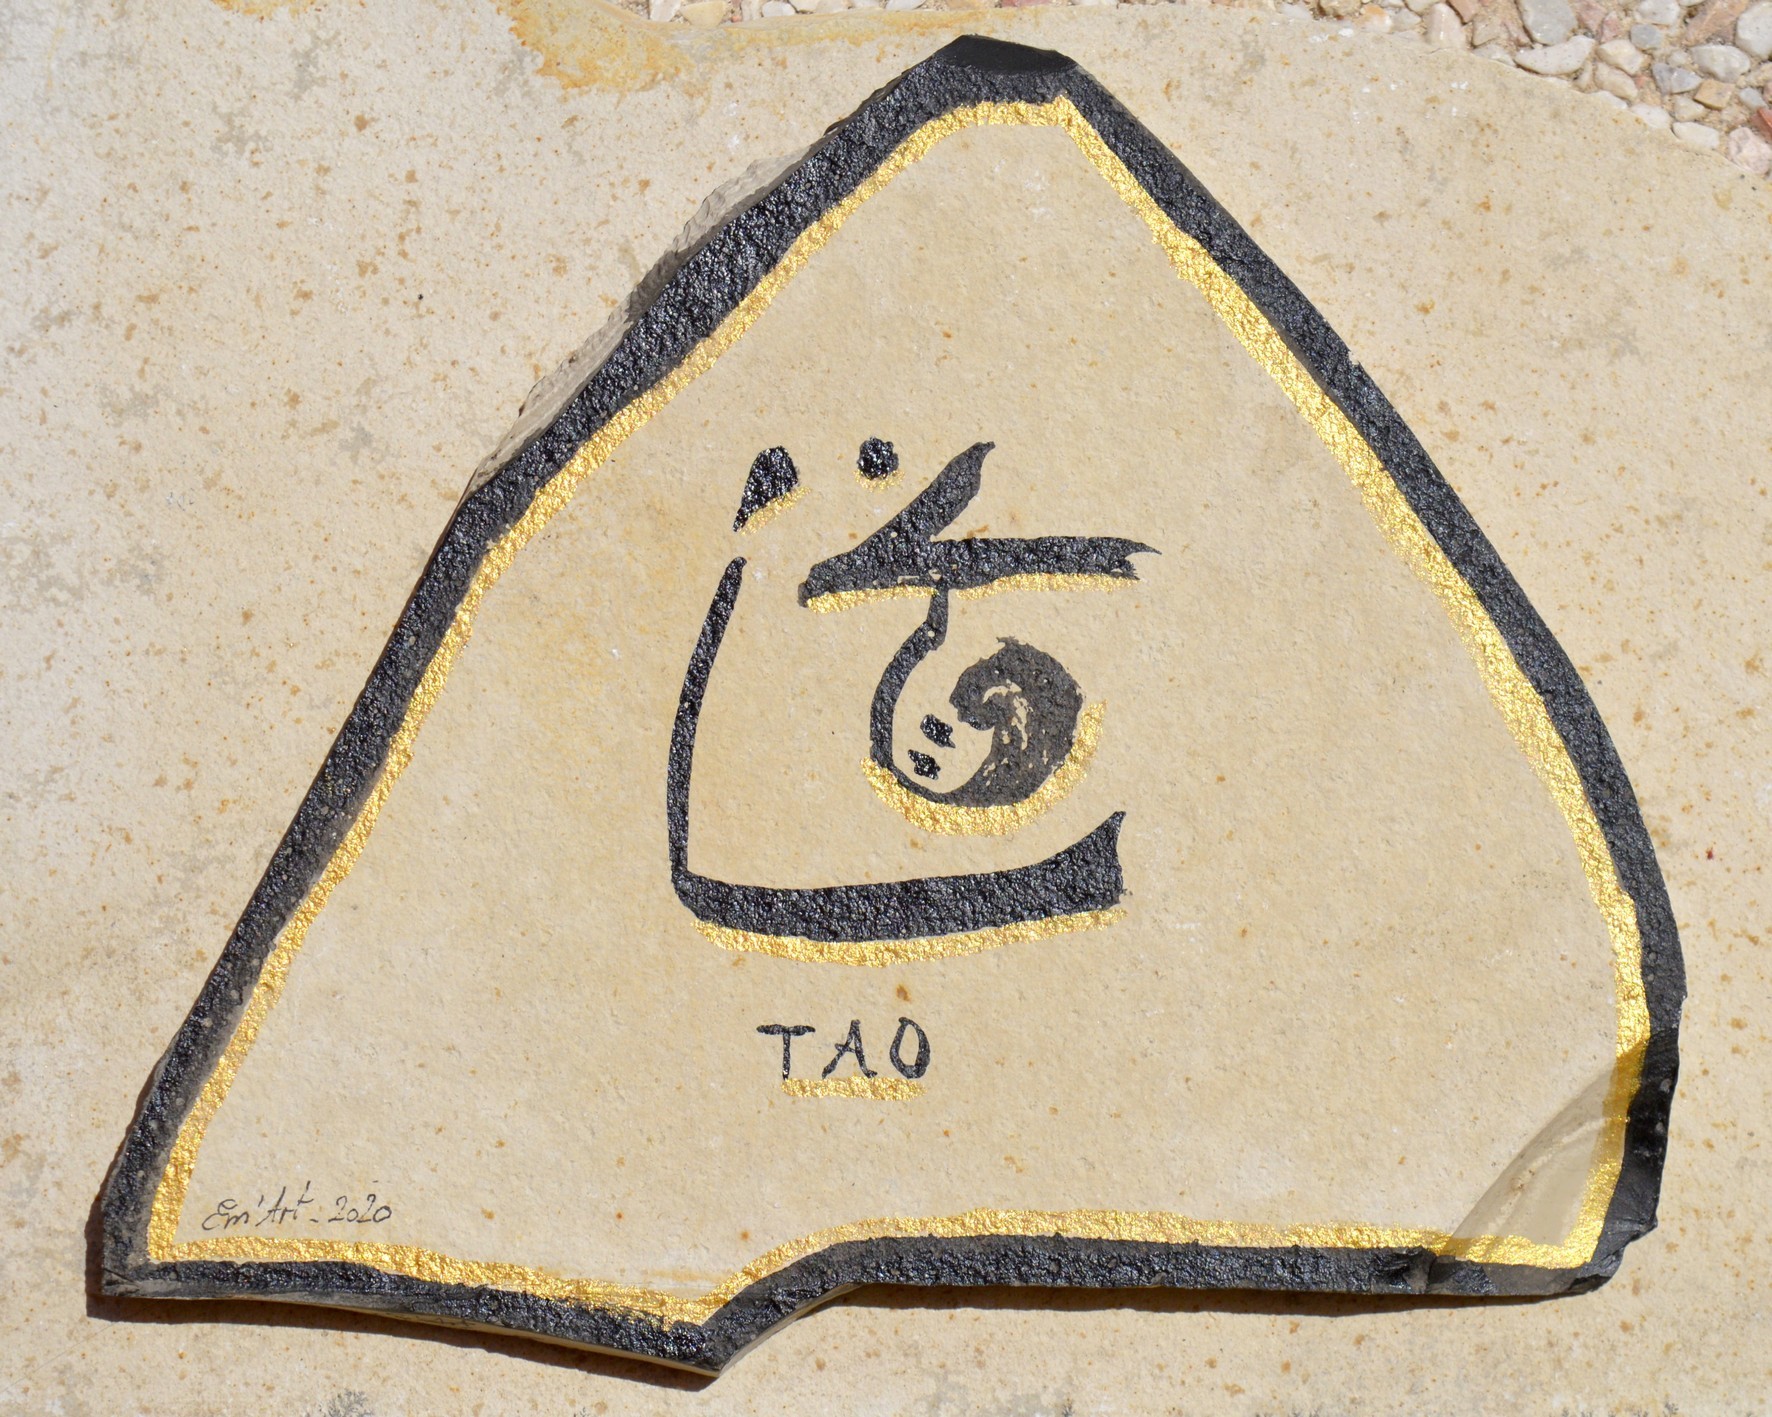 Tao, face A, india ink drawing on flat stone by Emmanuelle Baudry